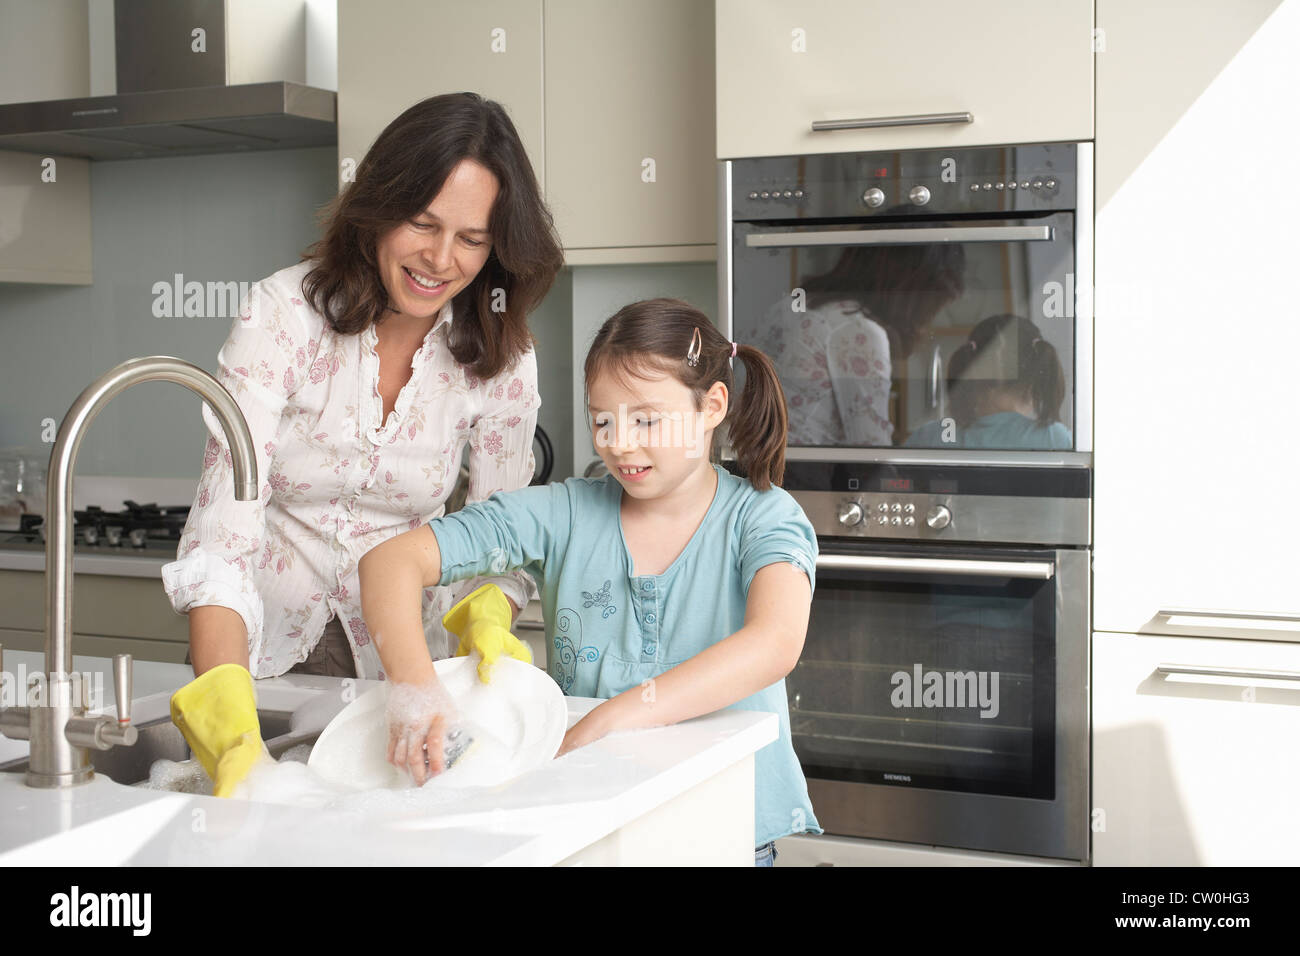 Mother and daughter washing dishes Stock Photo